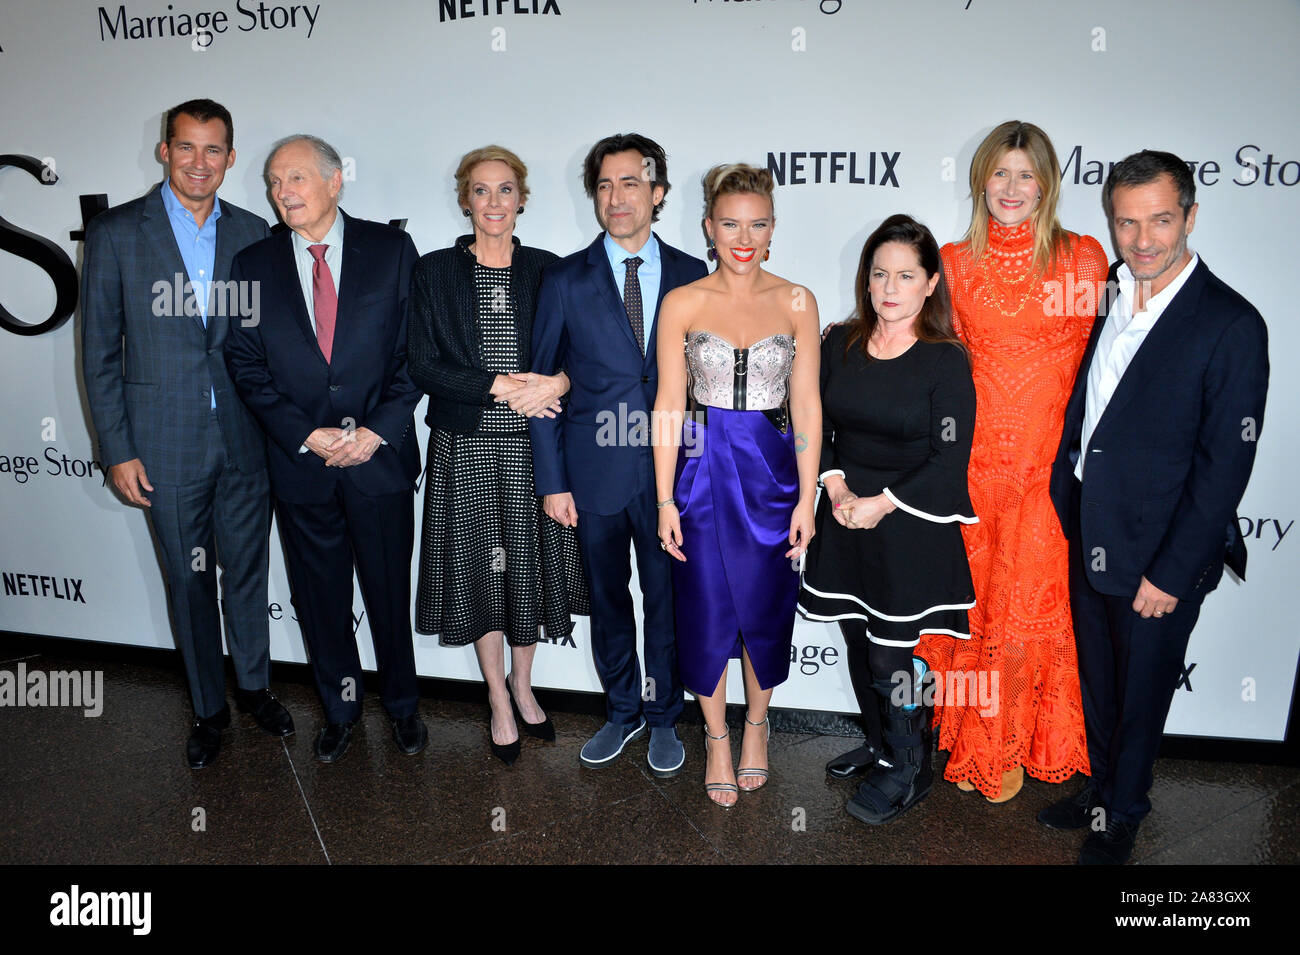 Los Angeles, USA. 06th Nov, 2019. LOS ANGELES, USA. November 06, 2019: Scott Stuber, Alan Alda, Julie Hagerty, Noah Baumbach, Scarlett Johansson, Martha Kelly, Laura Dern & David Heyman at the premiere for 'Marriage Story' at the DGA Theatre. Picture Credit: Paul Smith/Alamy Live News Stock Photo